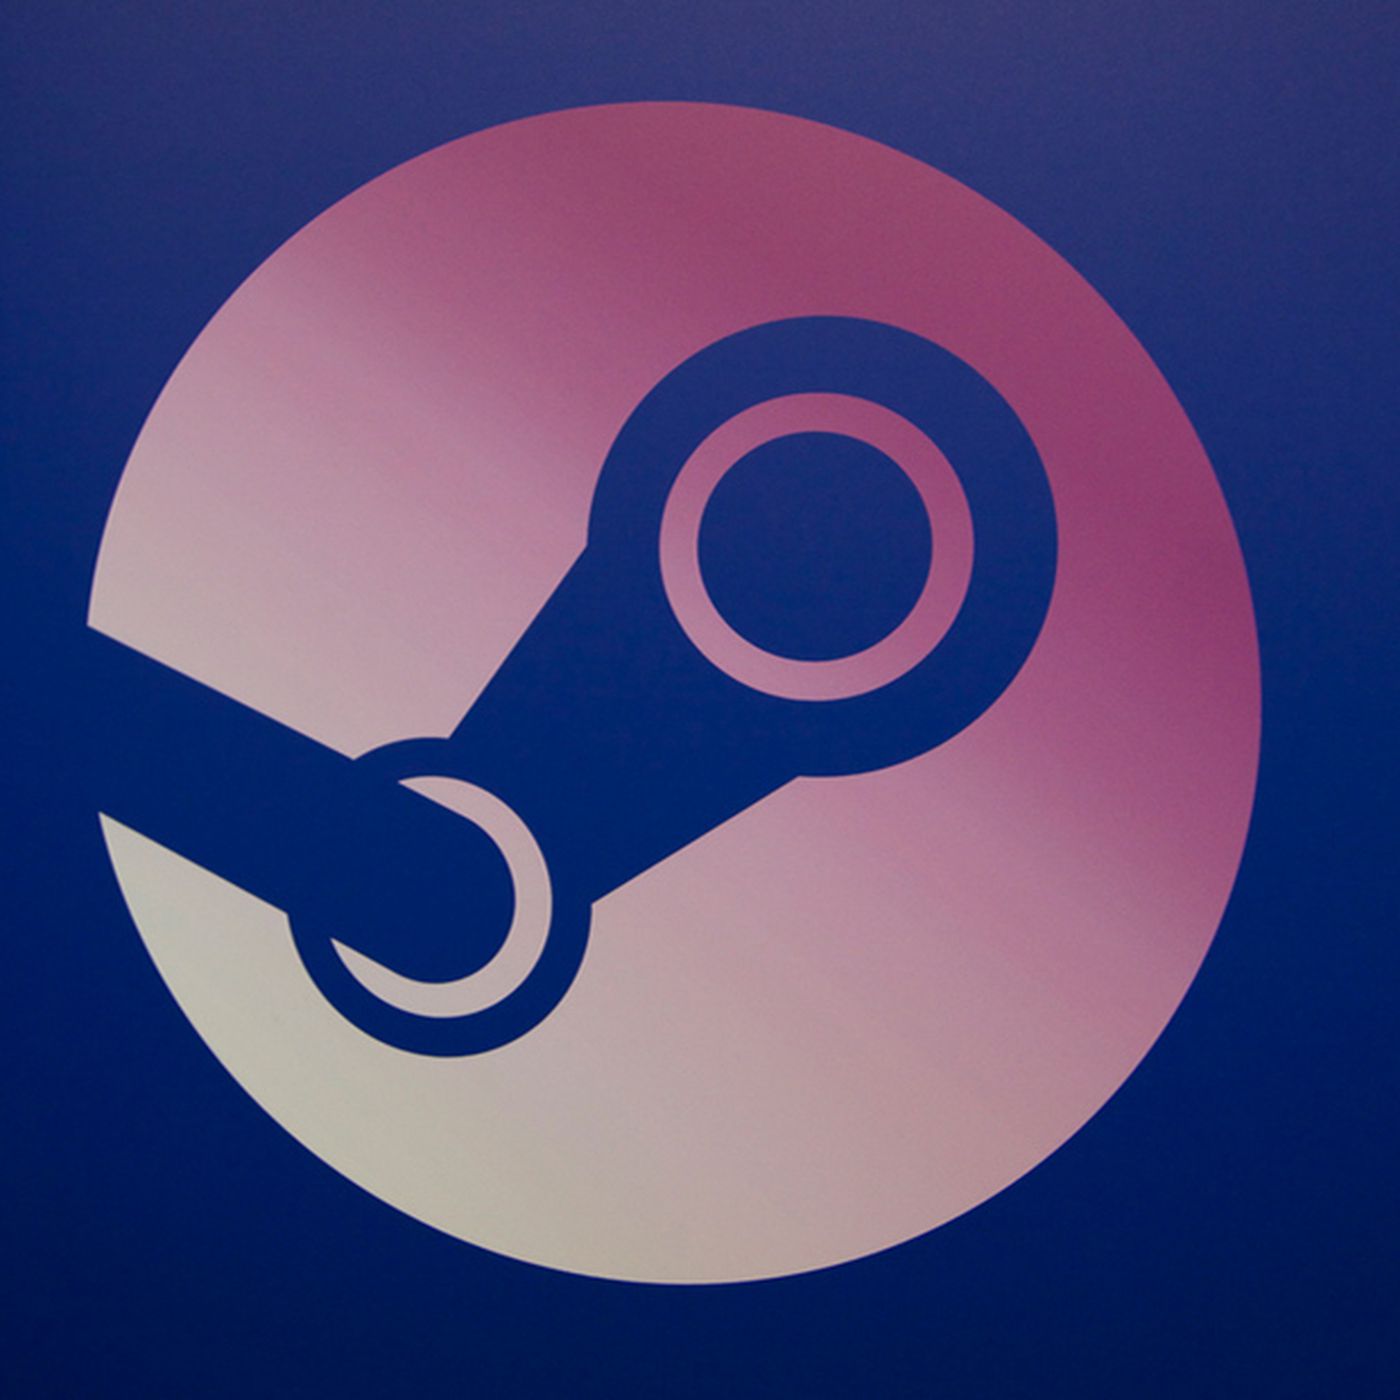 Steam S Summer Sale 2020 Will Run From June 25 To July 9 With